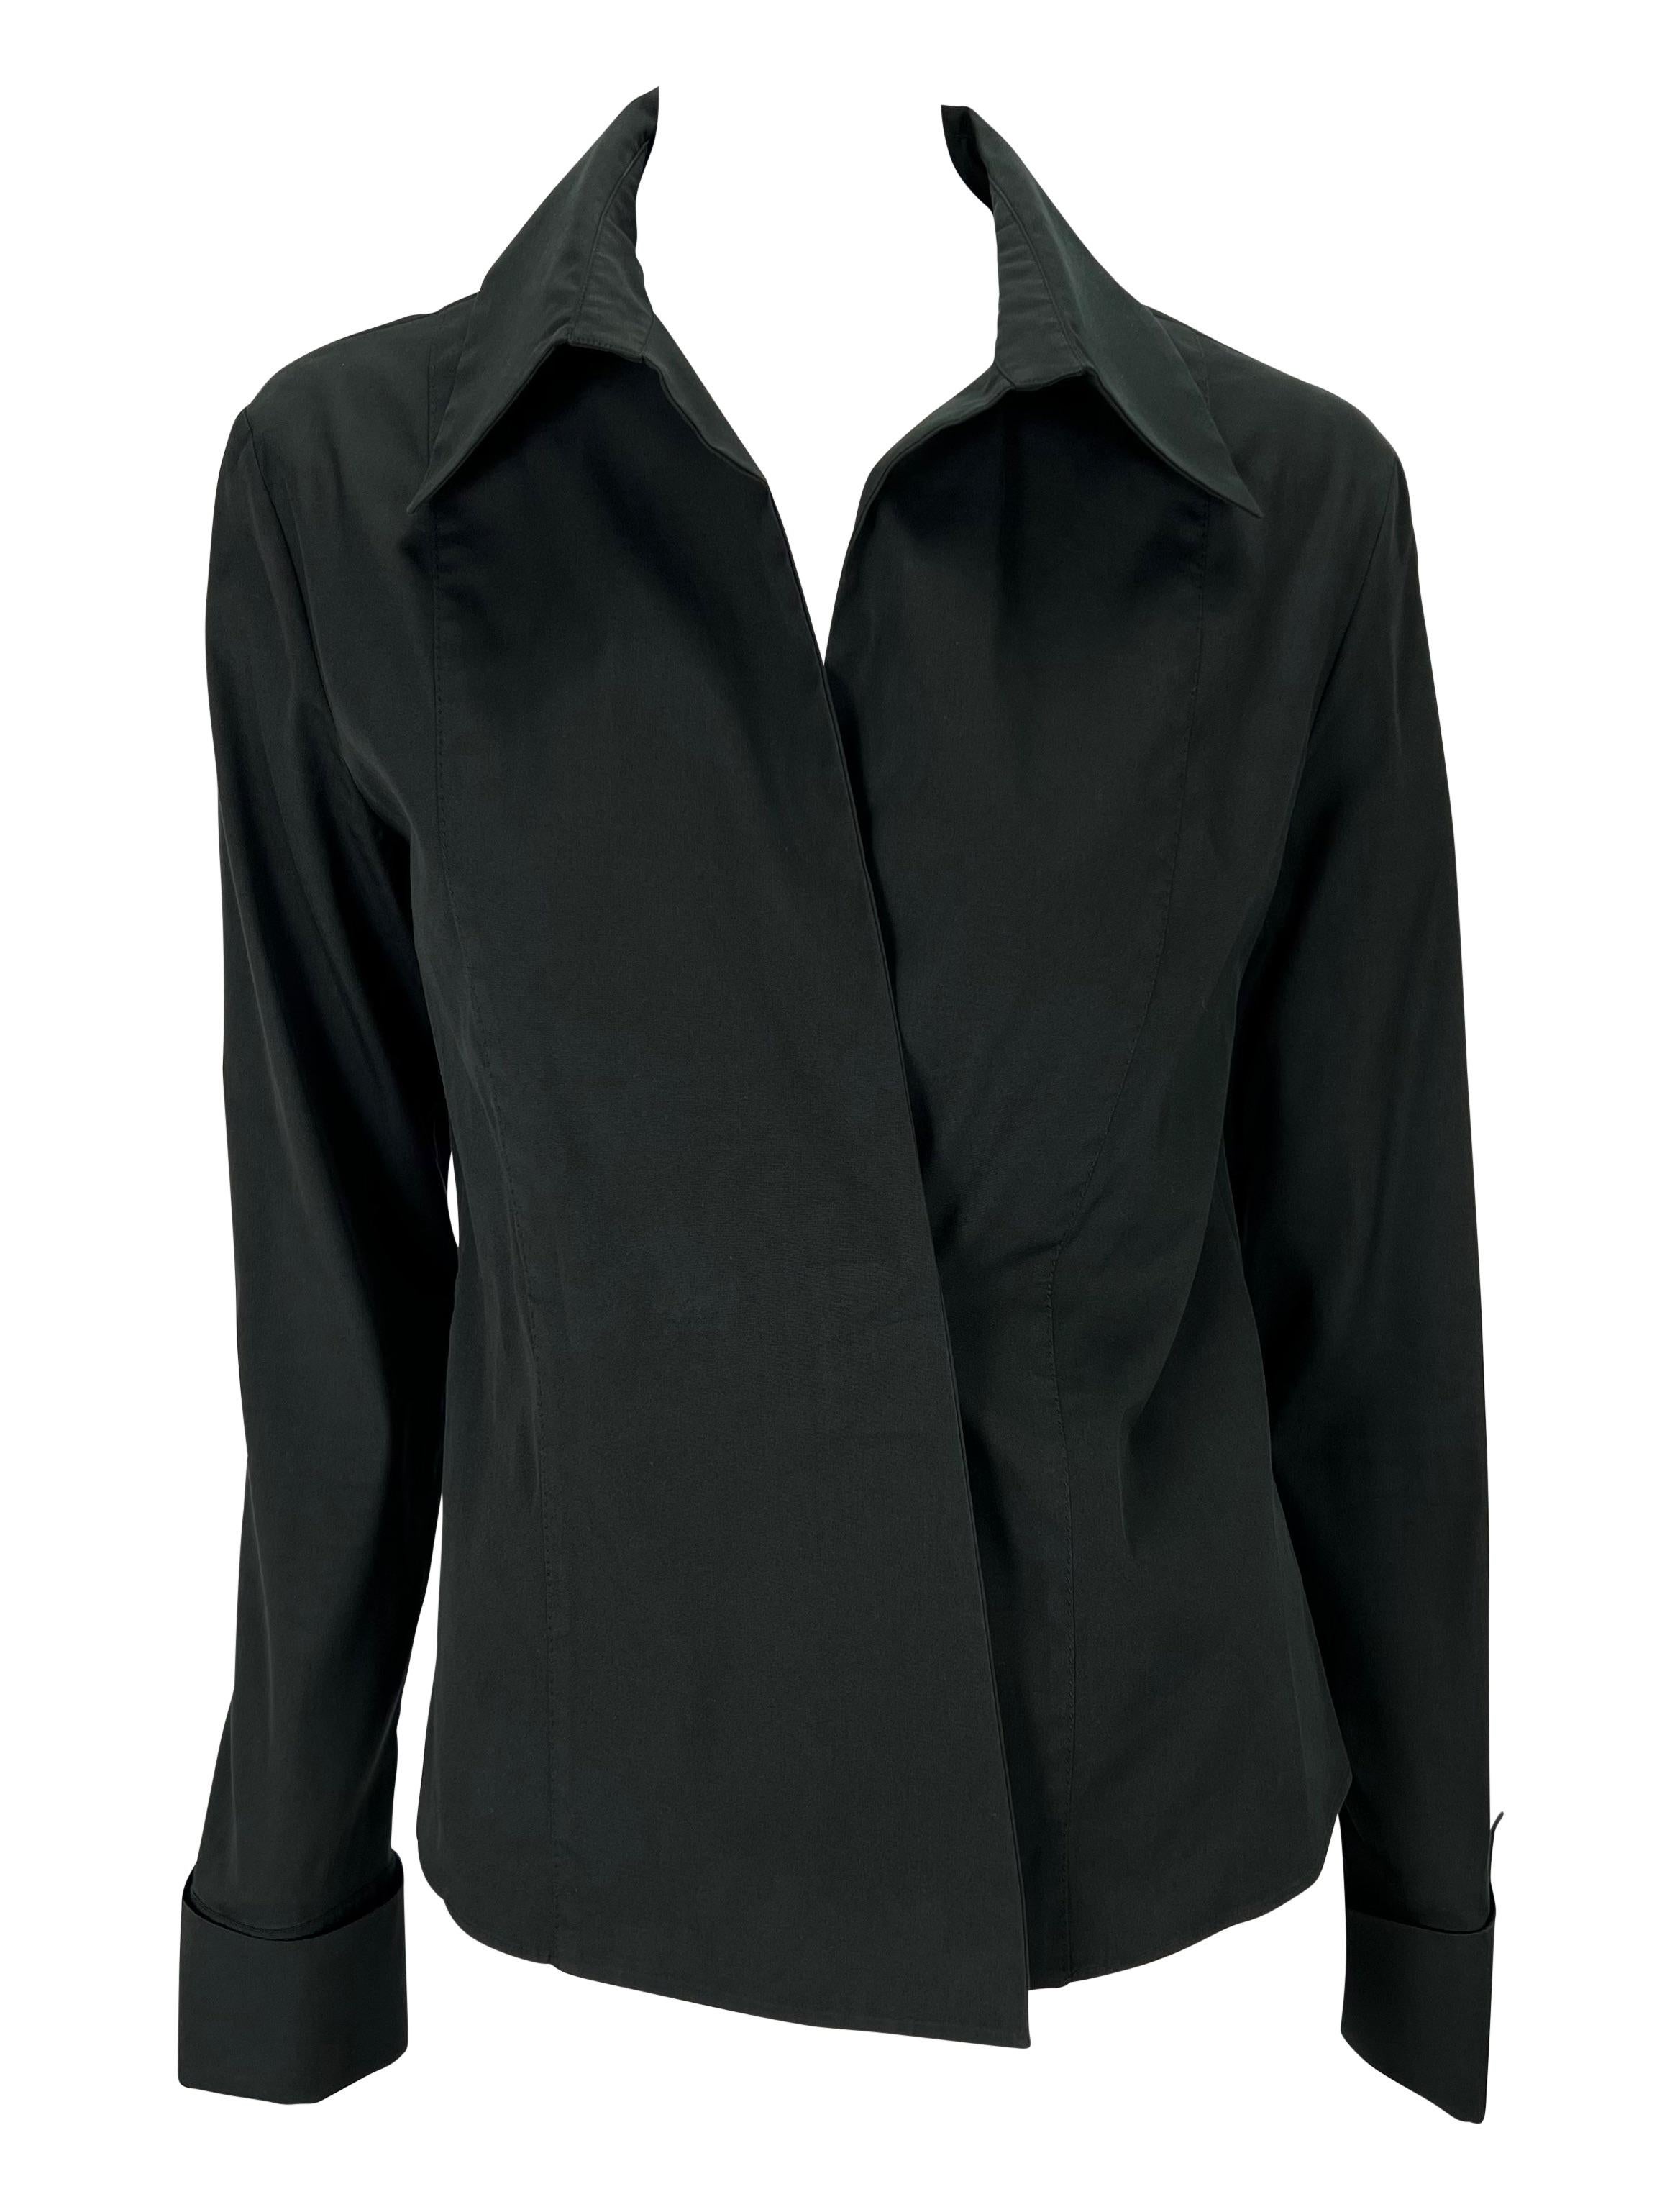 TheRealList presents: a black plunging neckline Gucci shirt, designed by Tom Ford. From 2000, this top features concealed button closures and french cuffs. Add this fabulous vintage Gucci by Tom Ford to your wardrobe! 

Follow us on Instagram!